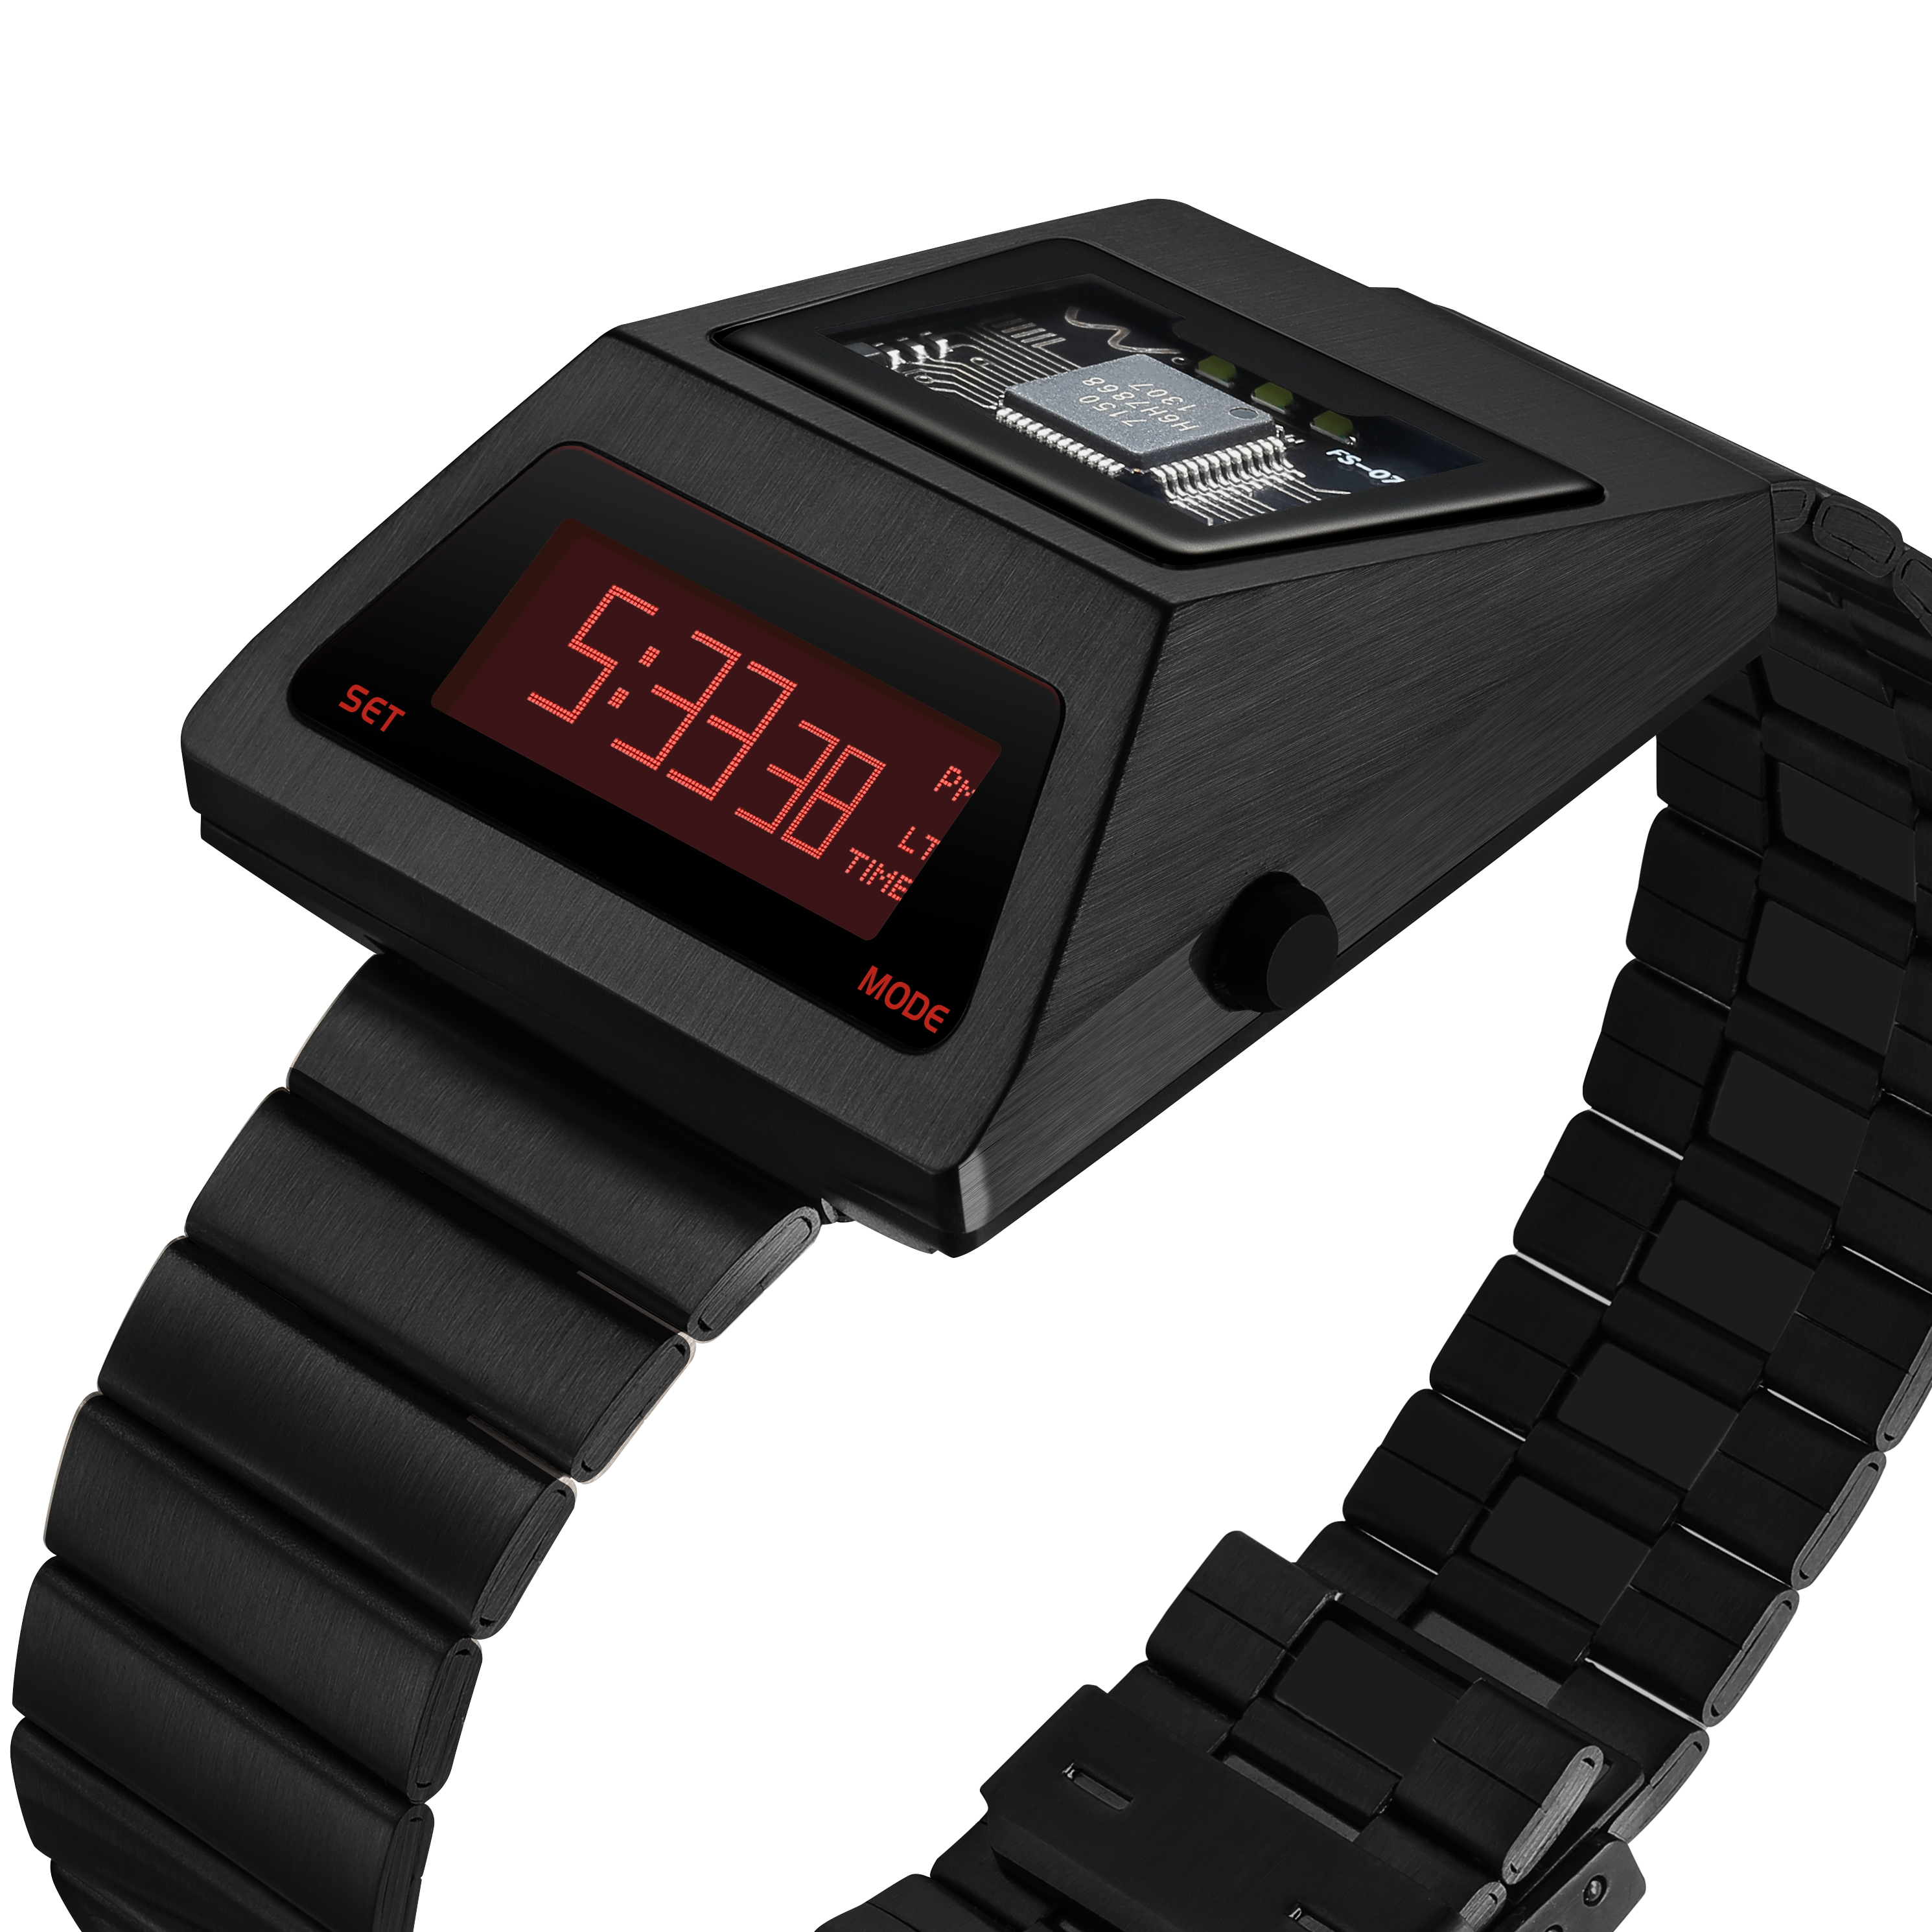 cyber-design-watches-s3000b-c-r-side view